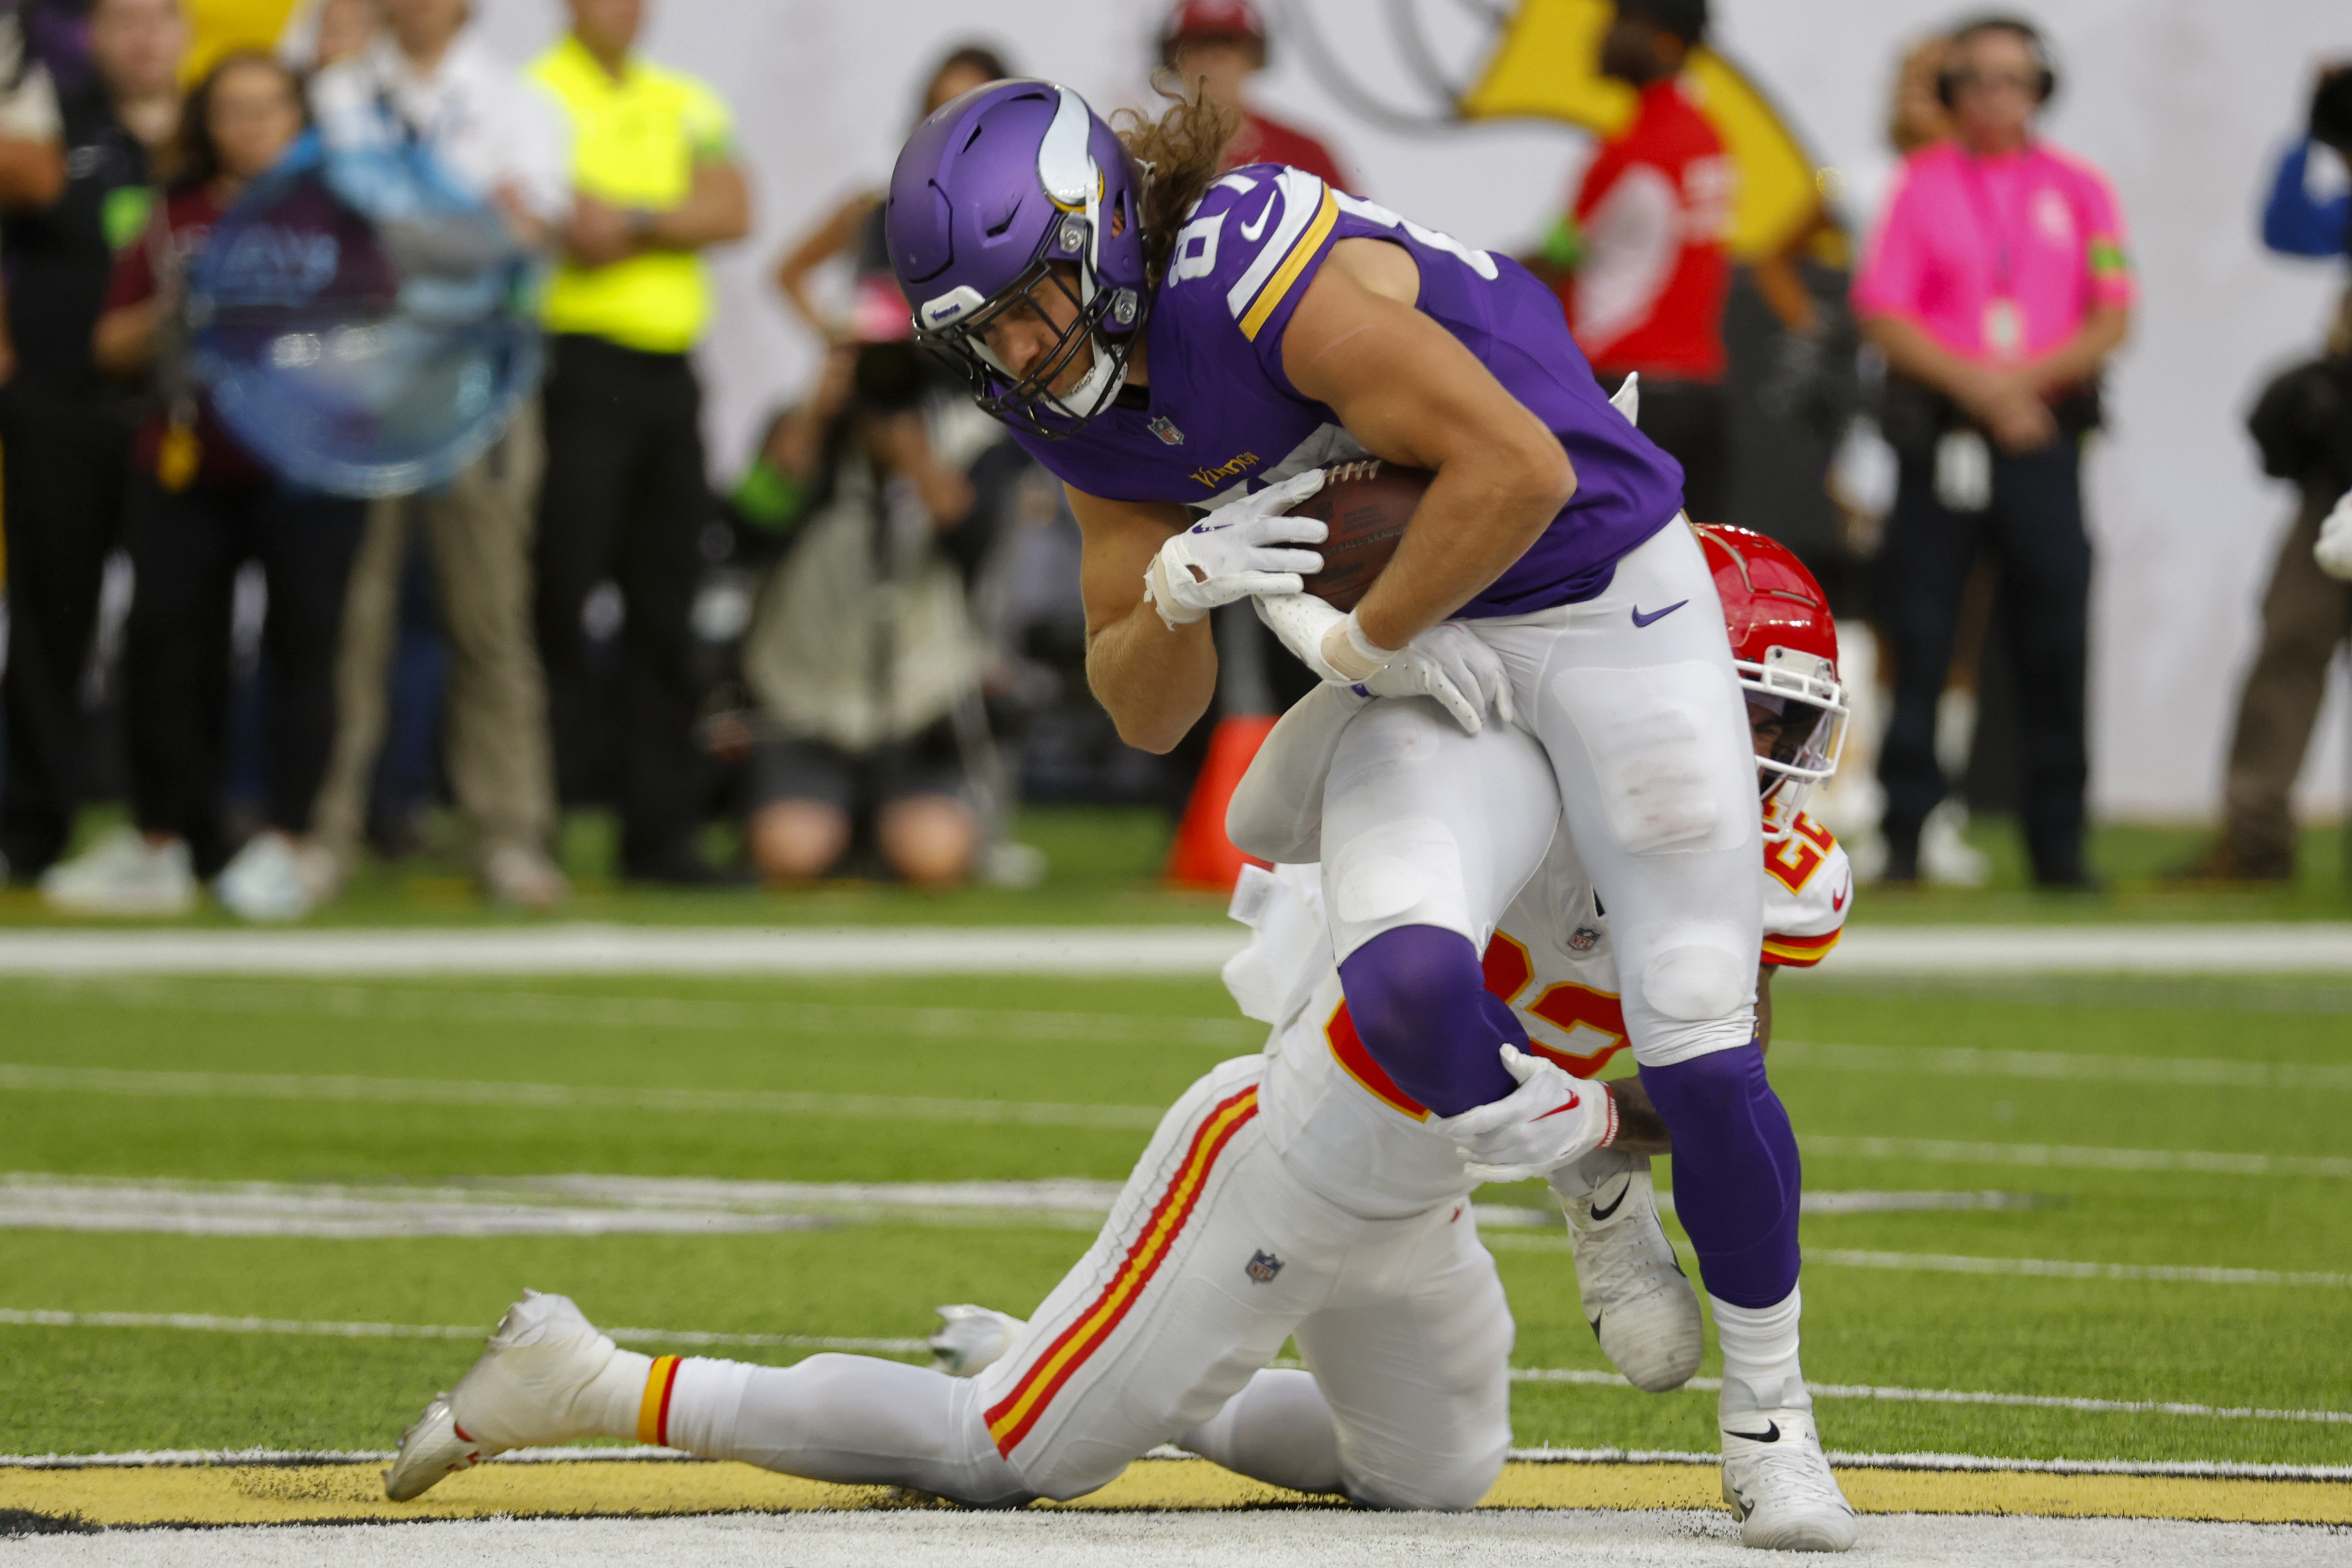 Vikings' offense out of sync as the team equals loss total from